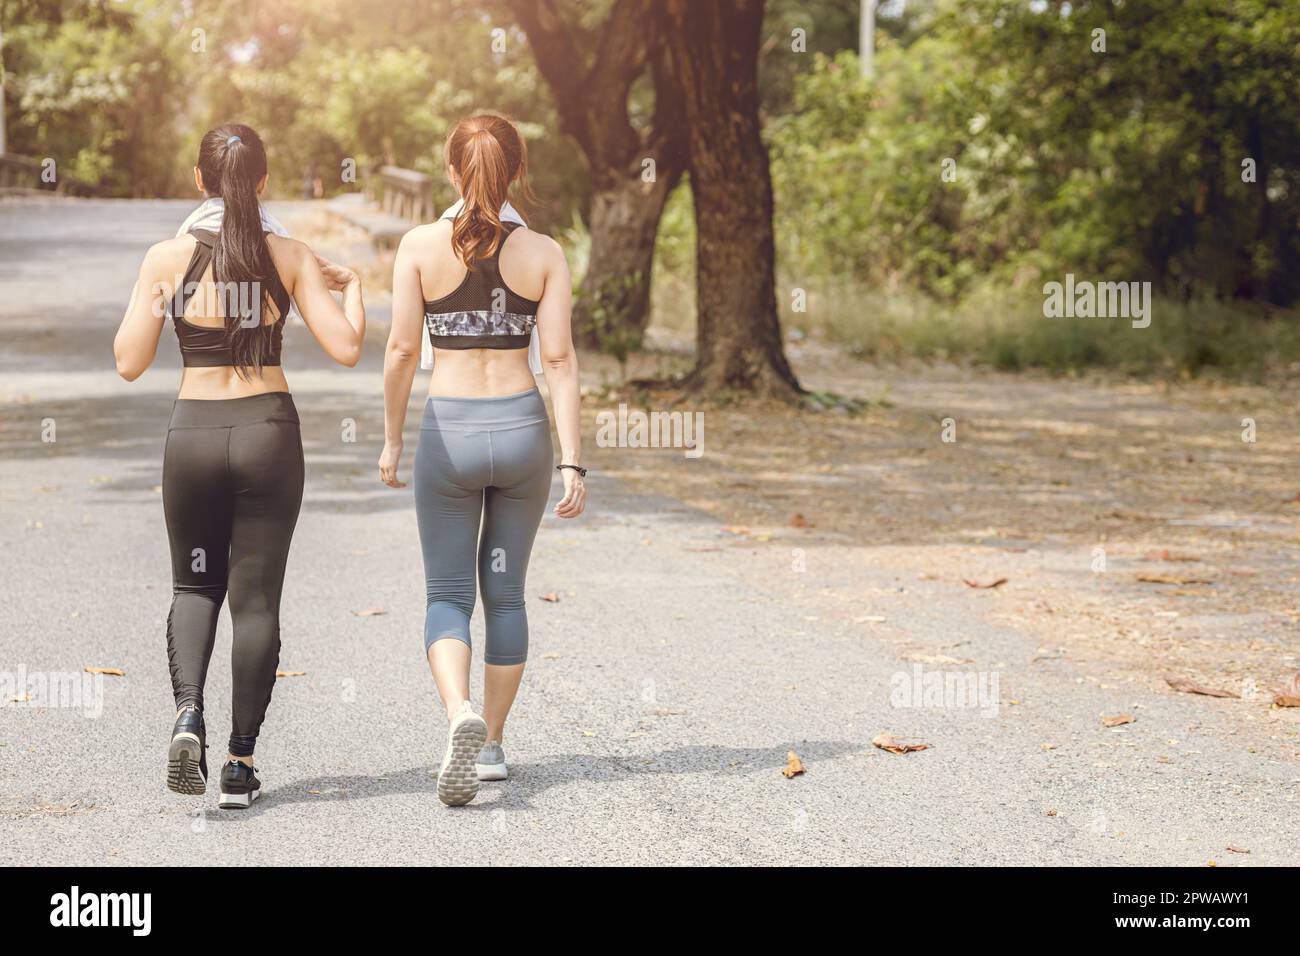 women friend walking together outdoor relax leisure for sport recreation in the morning Stock Photo